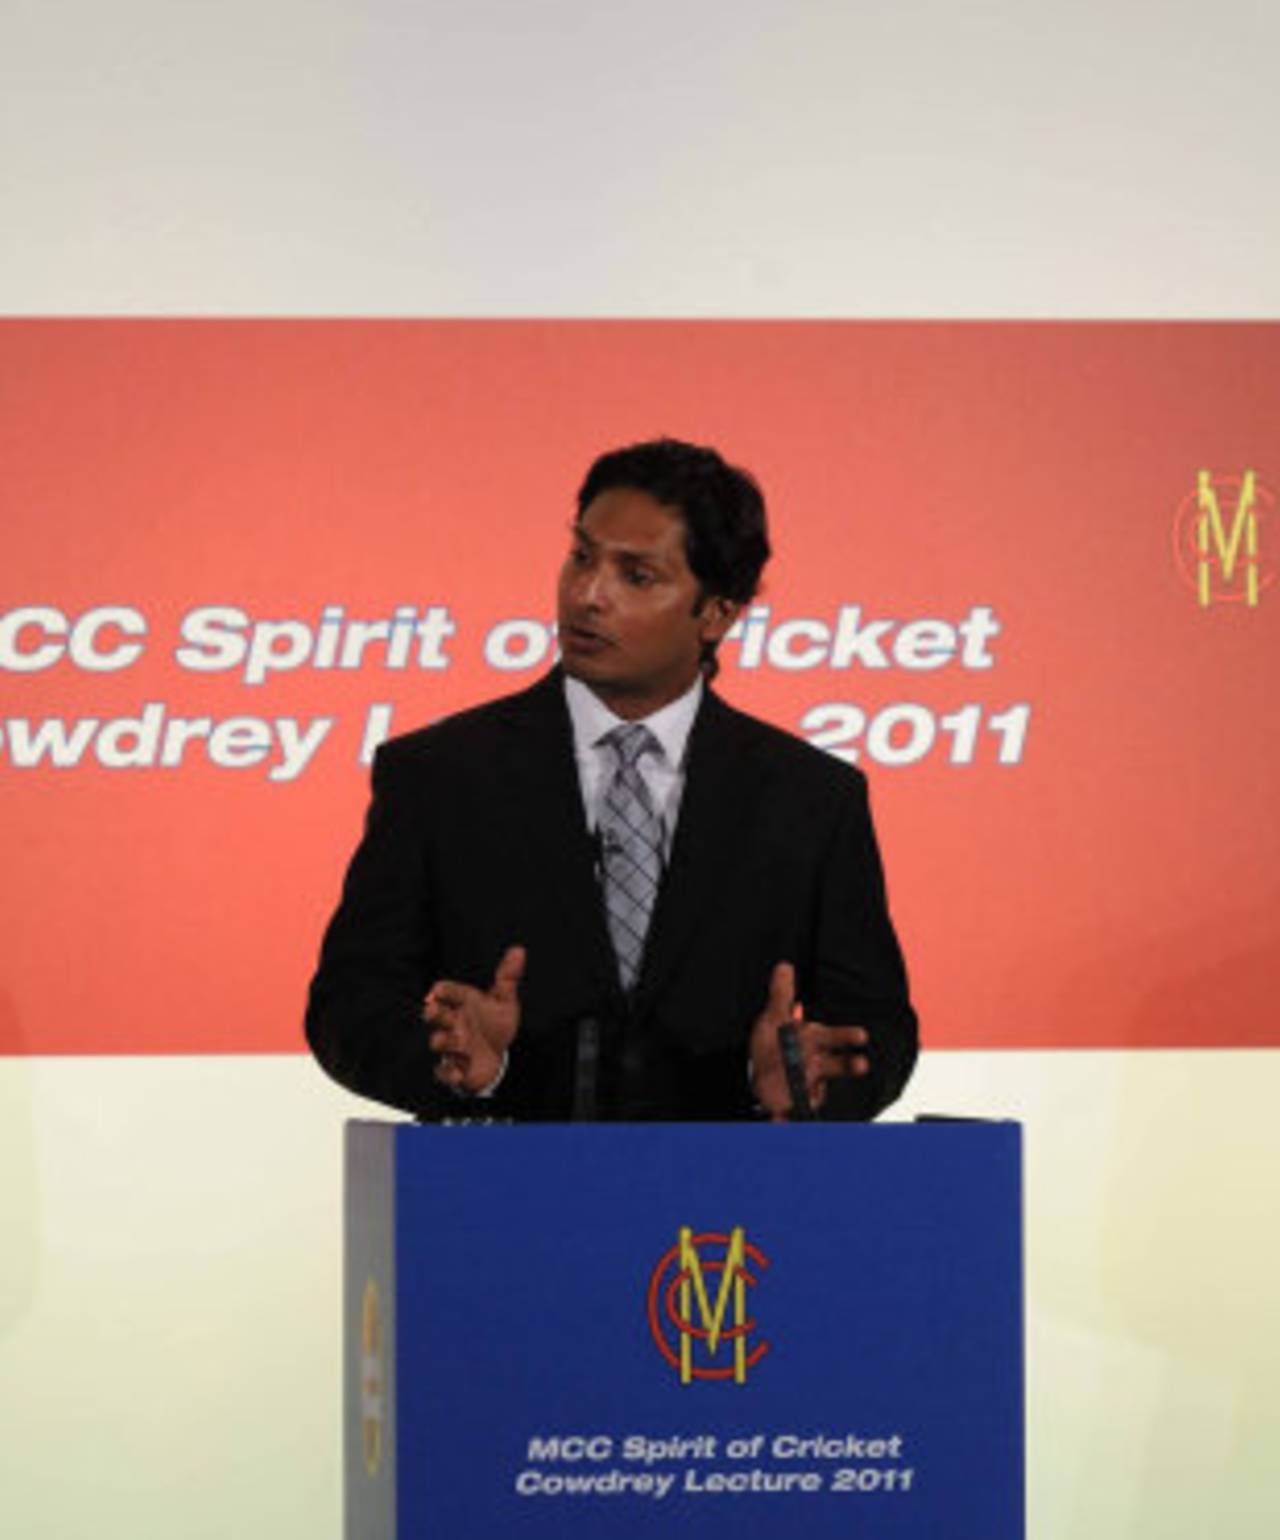 Kumar Sangakkara delivers the MCC Spirit of Cricket Cowdrey Lecture, Lord's, July 4, 2011